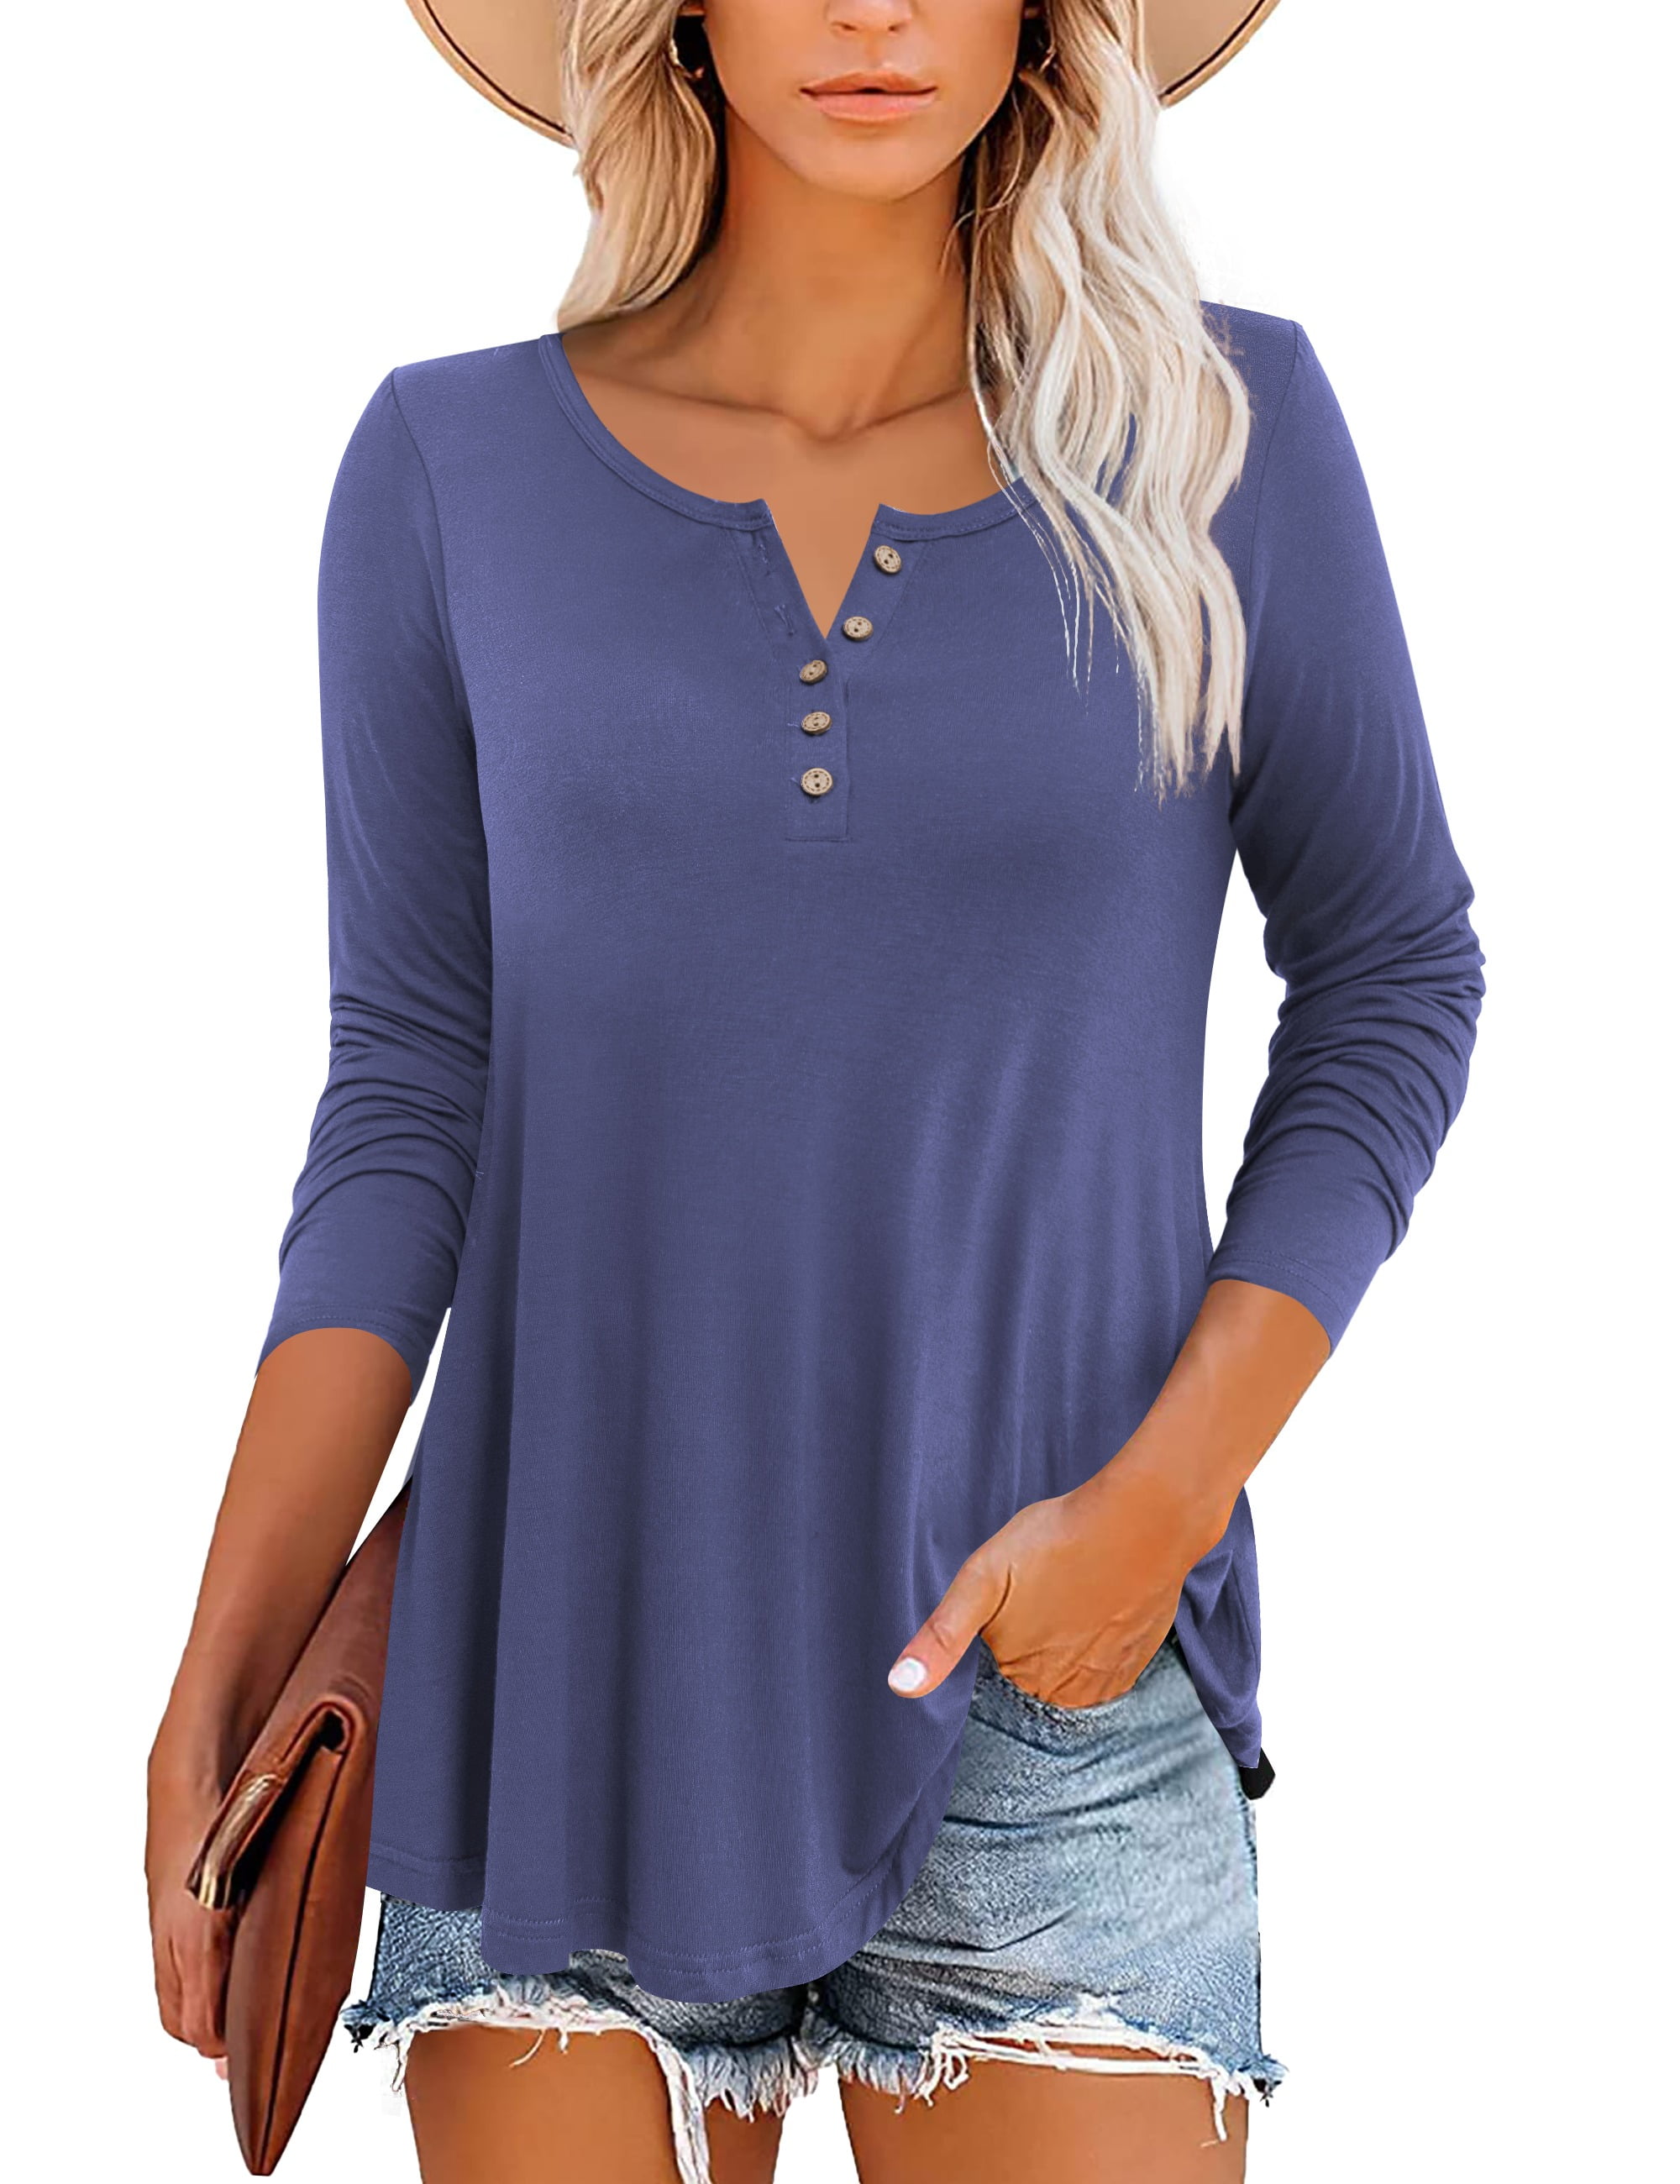 Traleubie Plus Size Tunic Tops Long Sleeve Casual Floral Printed Henley ...